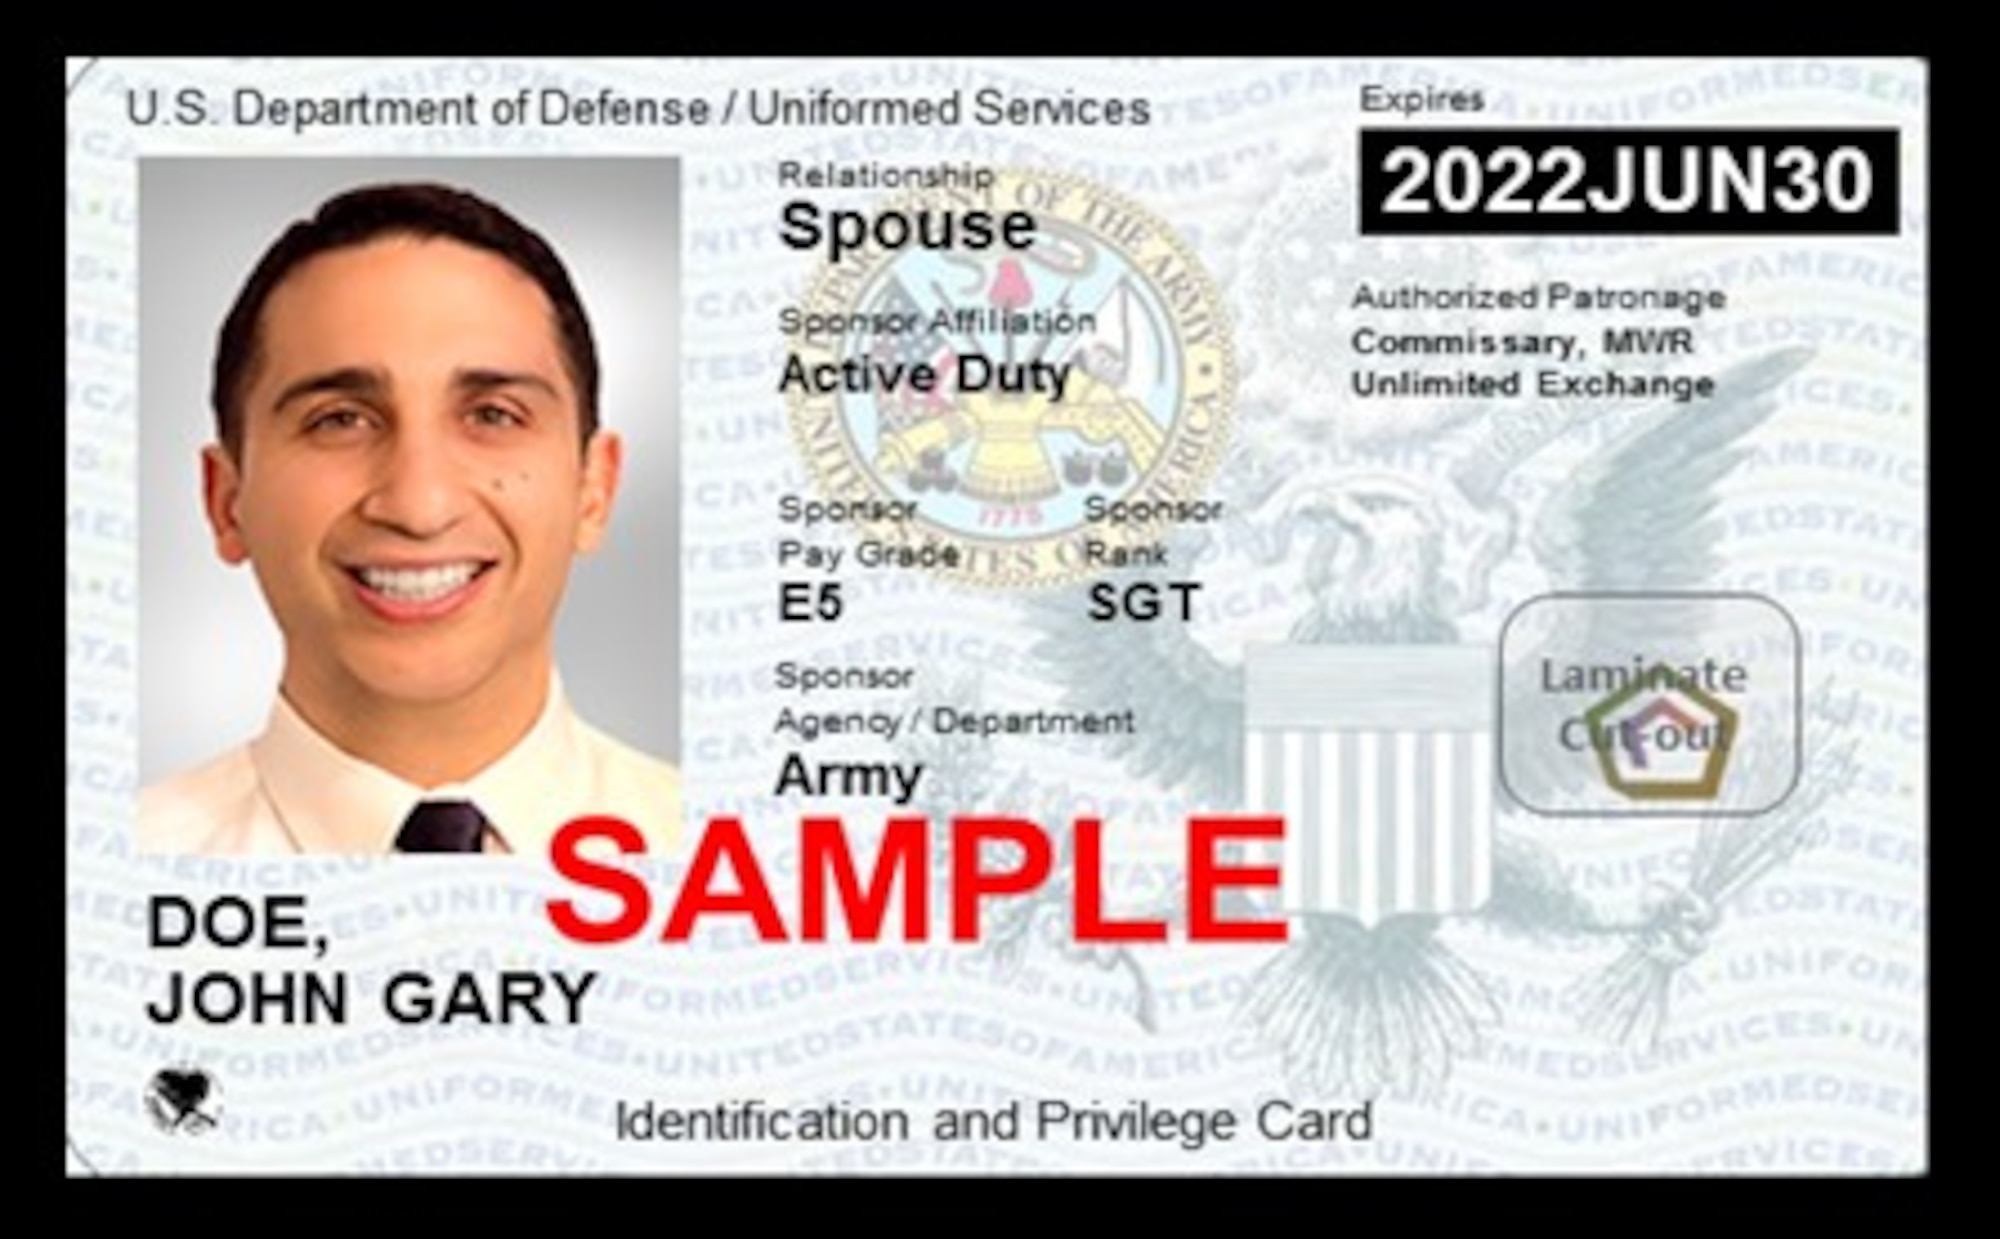 A Next Generation Uniformed Services Identification is displayed.